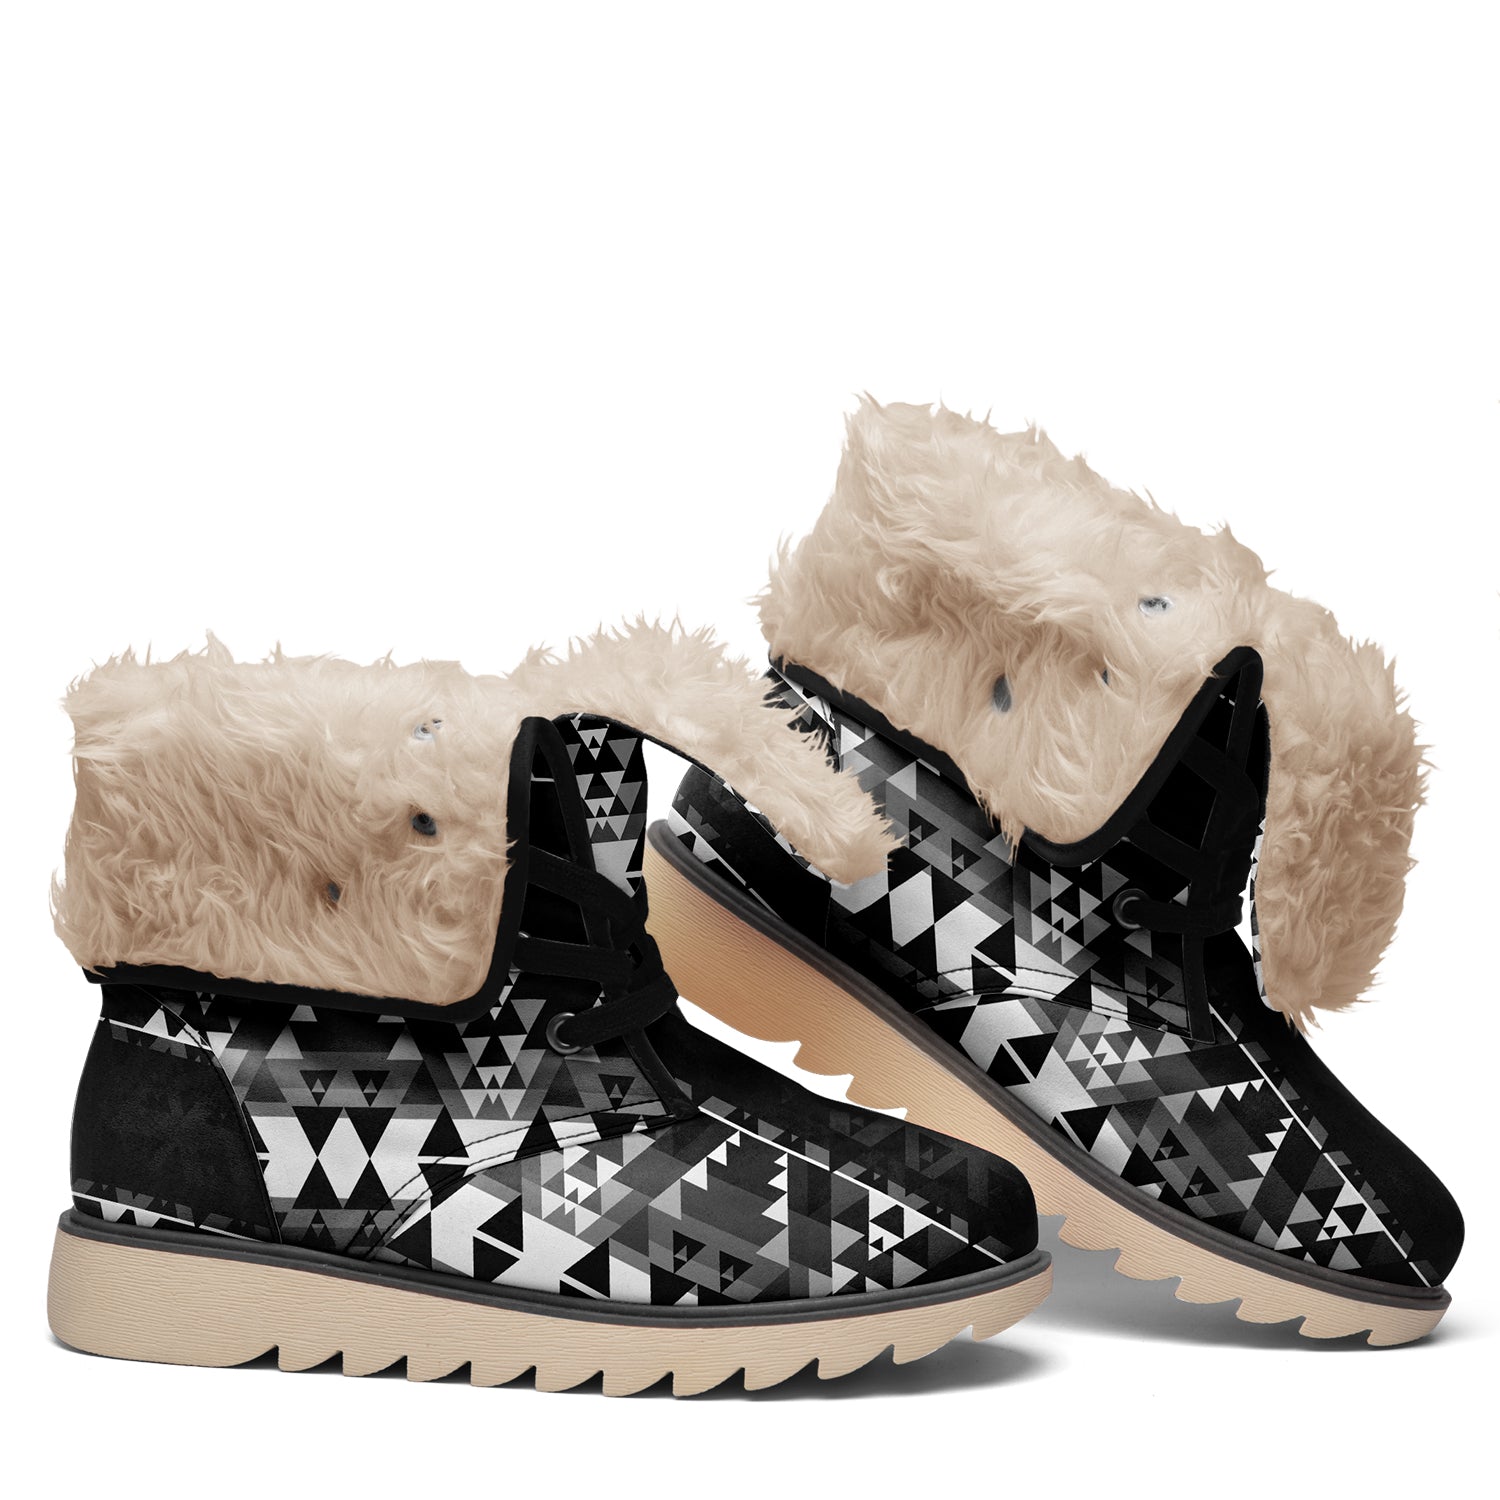 Writing on Stone Black and White Polar Winter Boots